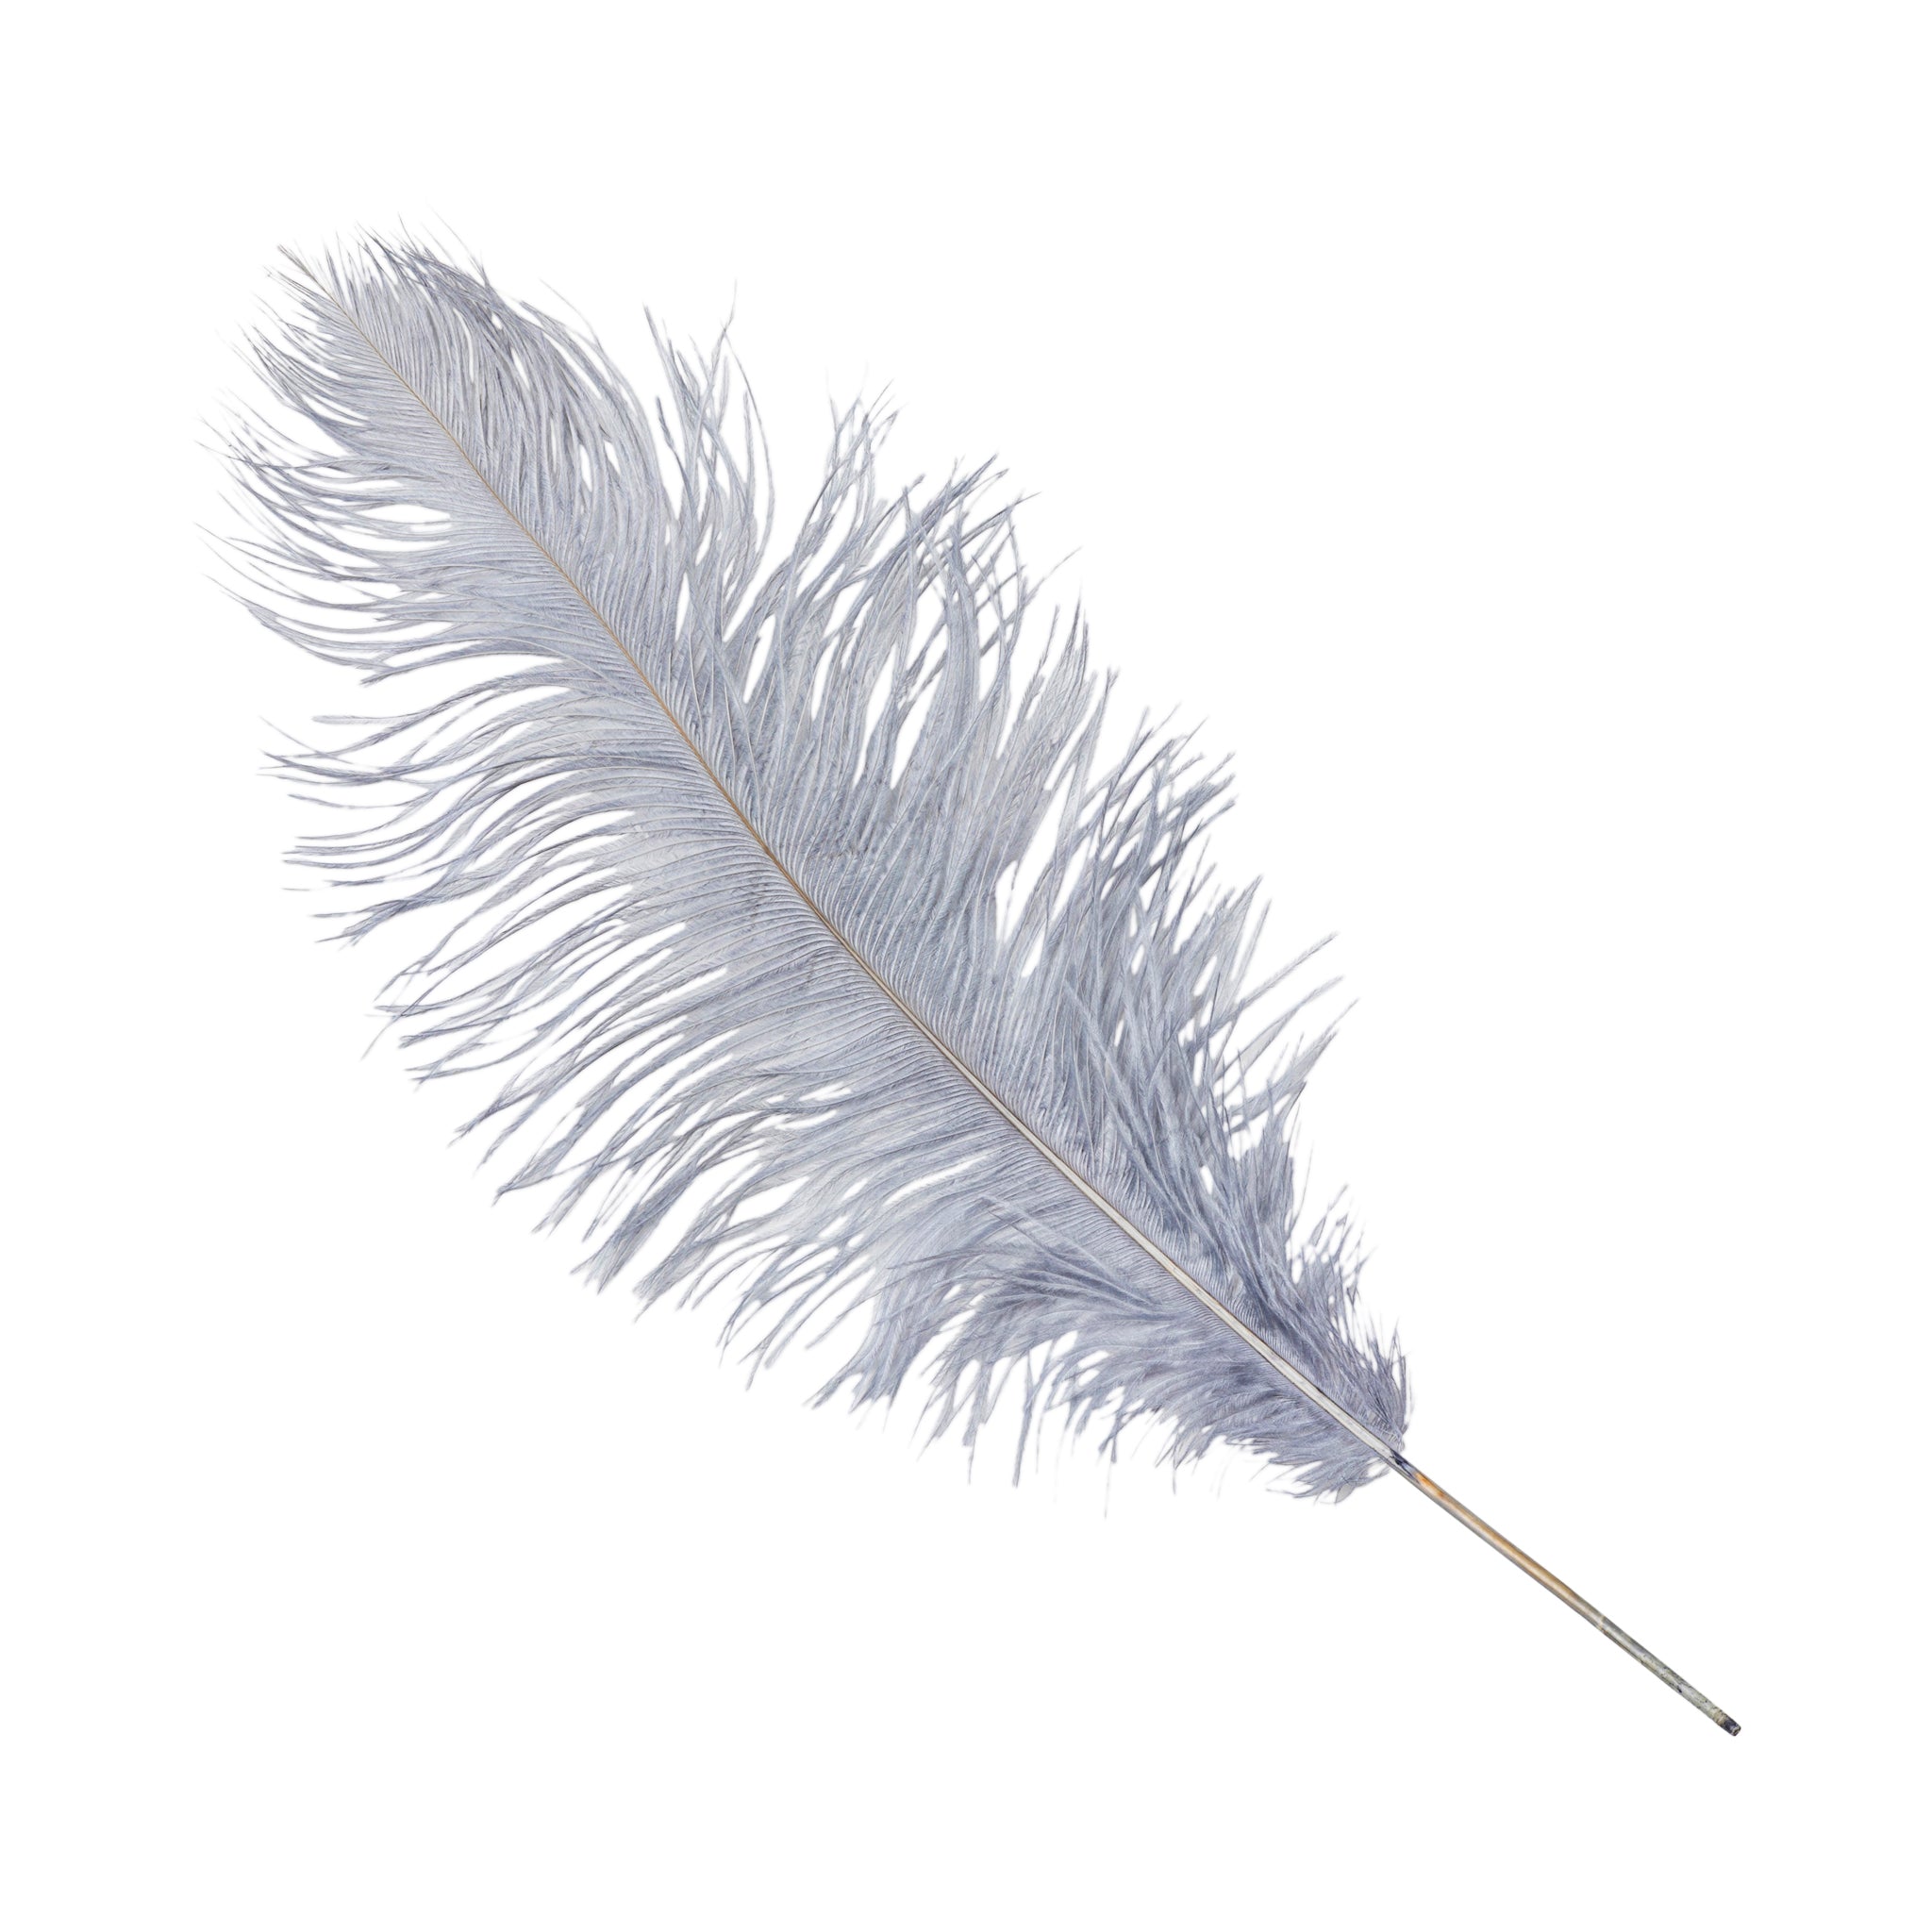 Single White or Black Ostrich Feathers $2.60 per stem (plume